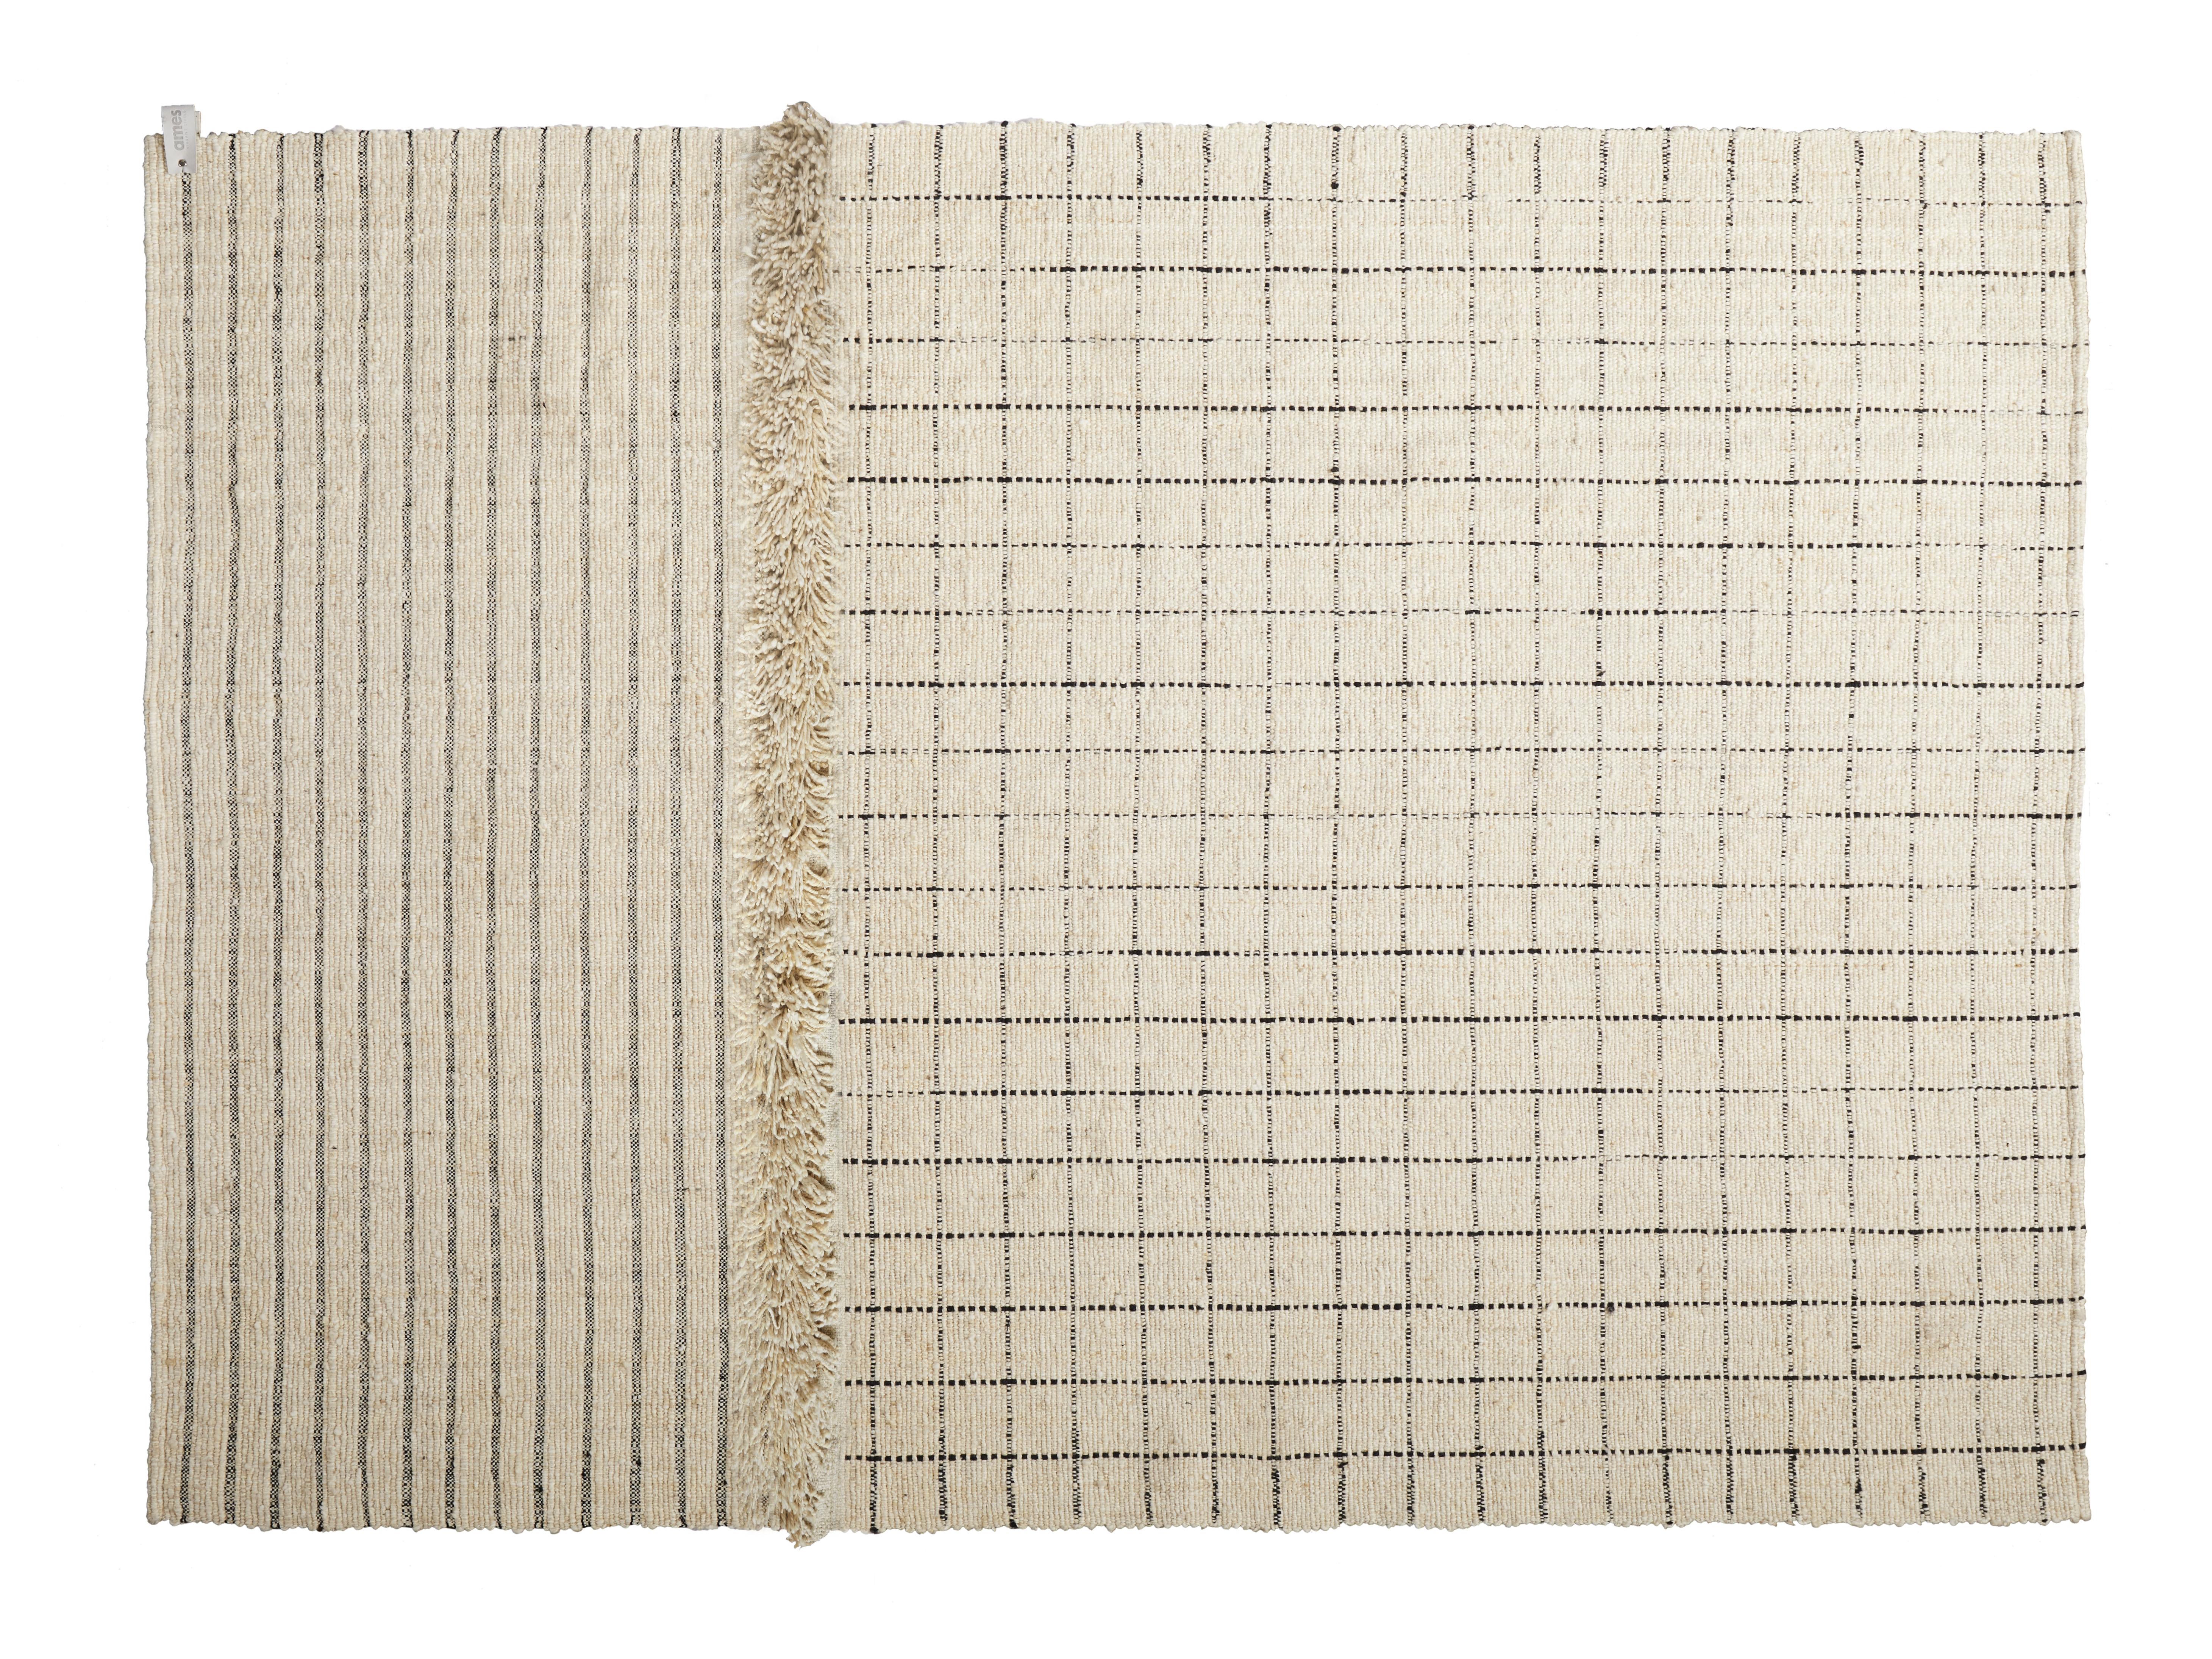 Karo large Subas rug by Sebastian Herkner
Materials: 100% natural virgin wool. 
Technique: Naturally dyed fibers. Hand-woven in Colombia.
Dimensions: W 310 x L 420 cm 
Available in colors: Karo, linea 1, linea 2, moton, oruga.

The Subas Karo